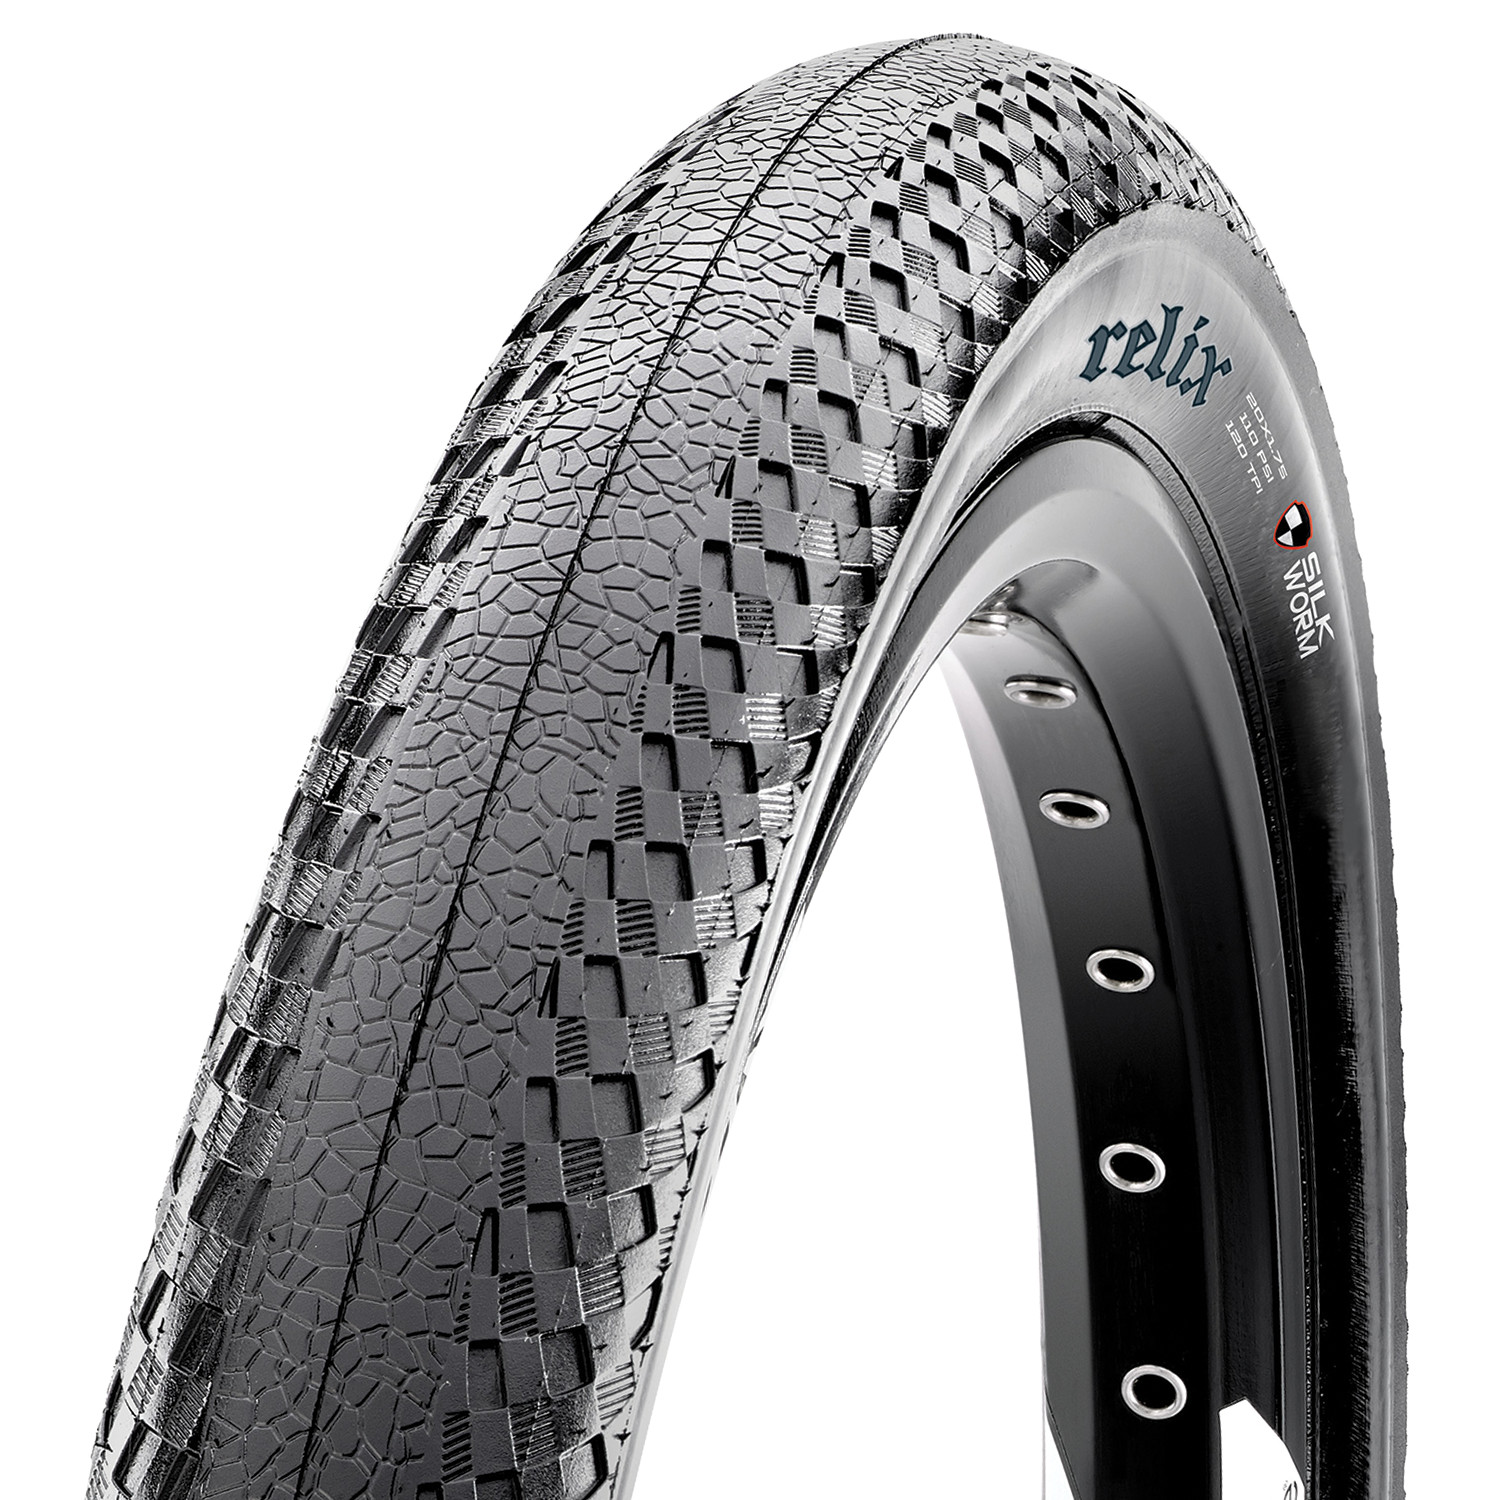 Picture of Maxxis Relix Folding Tire - SilkWorm - 20x1.75 Inch